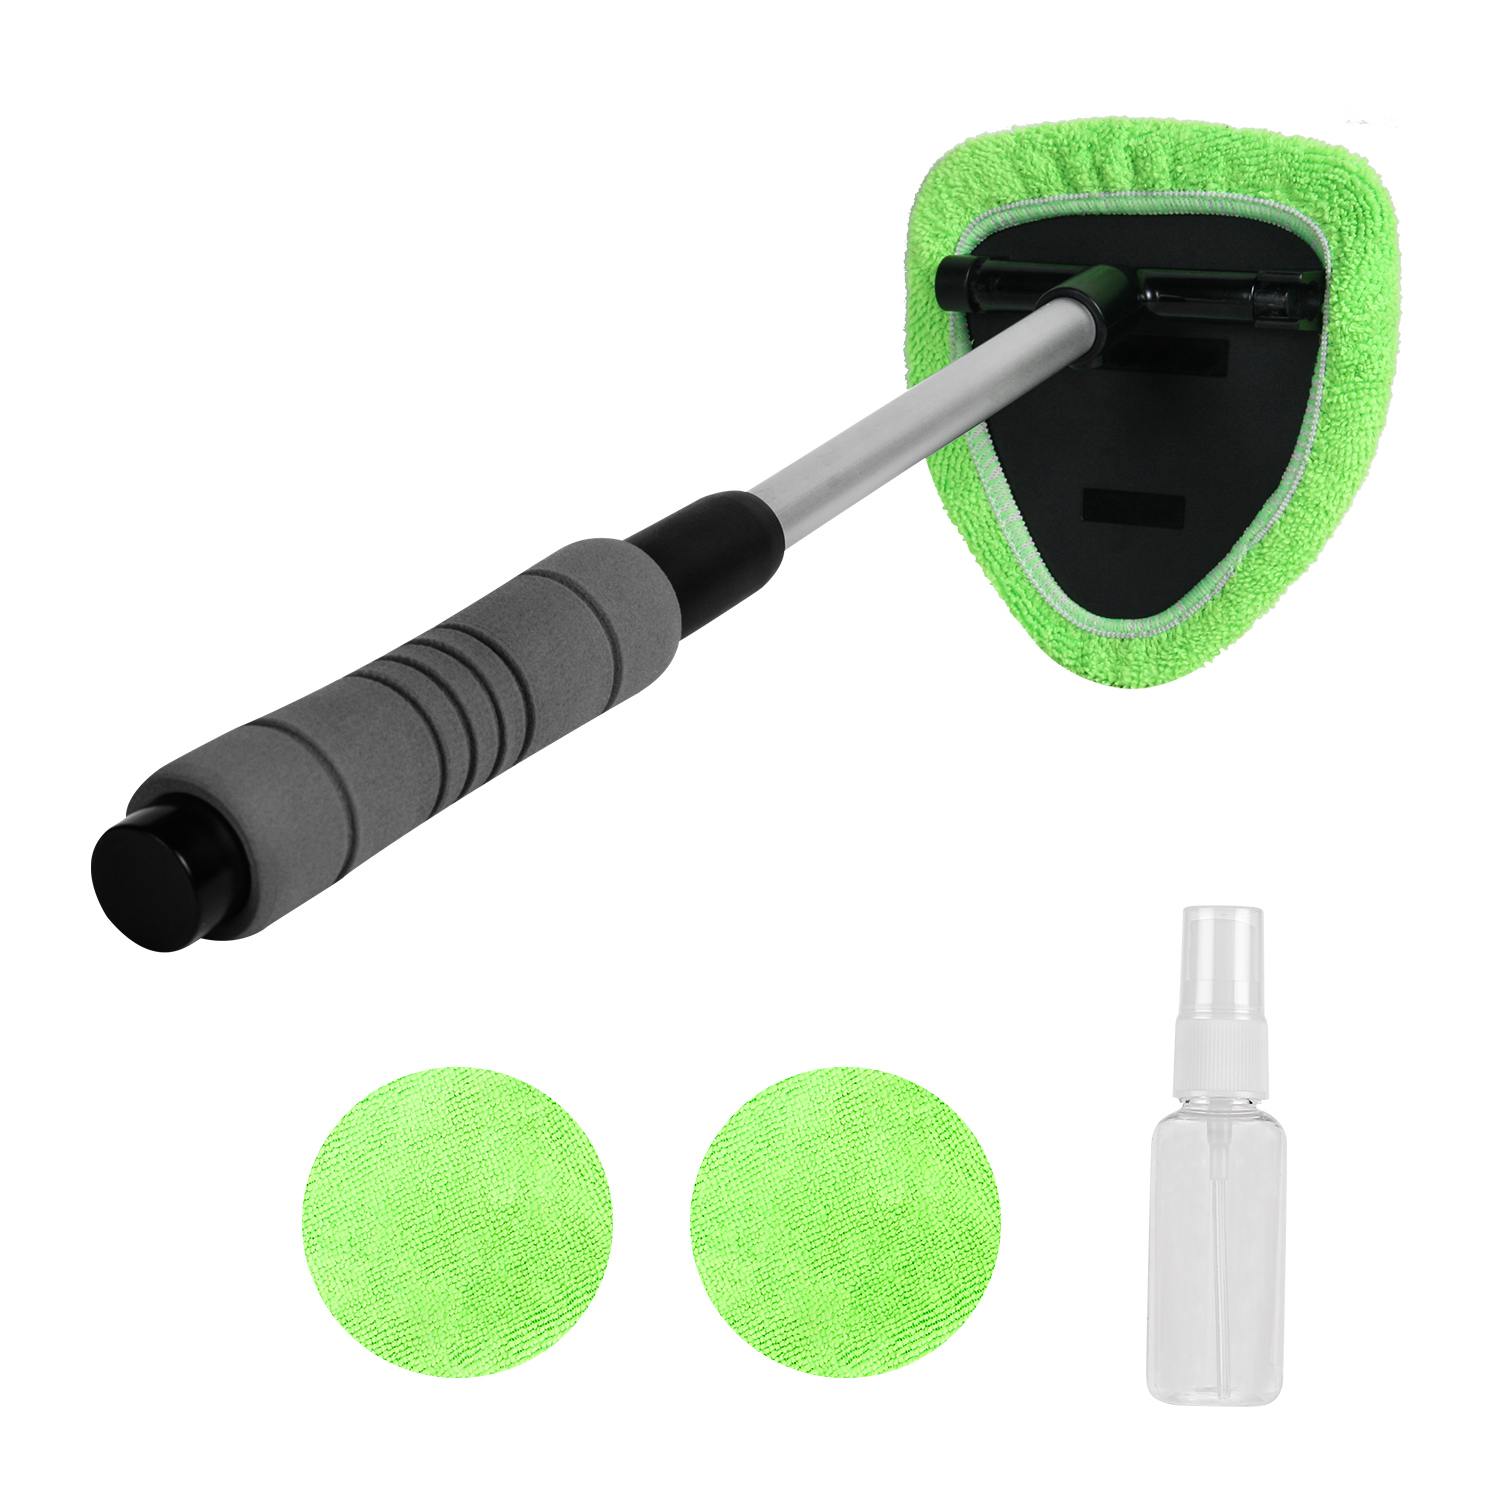 Windshield Clean Auto Wiper Cleaner Glass Window Brush Keeps Cars Vehicles Interior Exterior Windshields Windows Clean Tool 